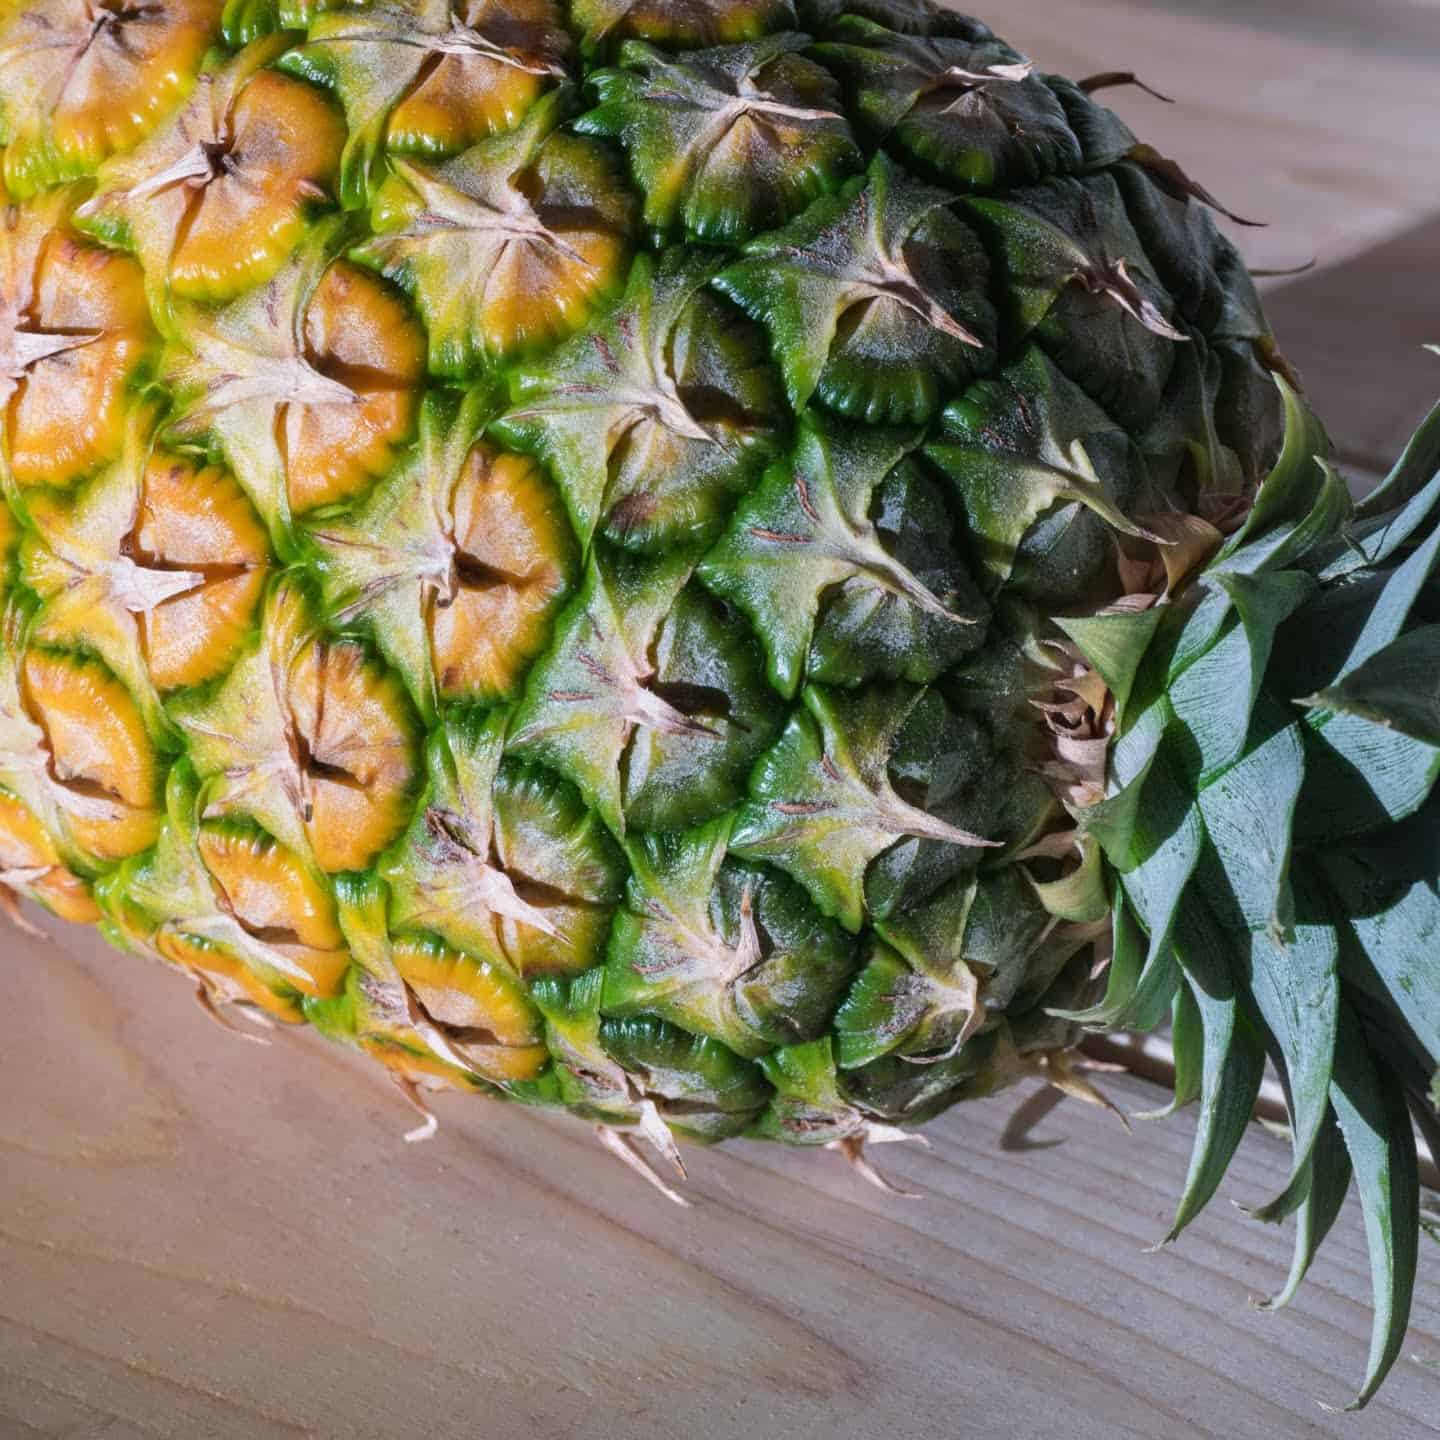 Check the color of the pineapple for ripeness